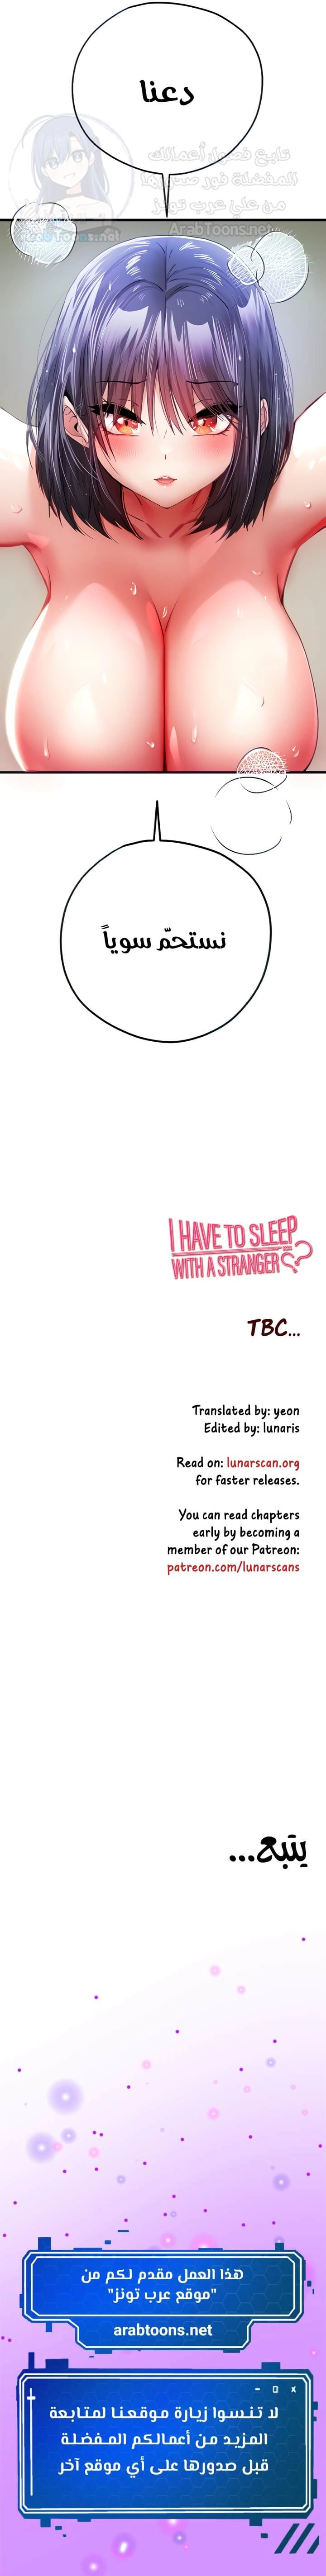 I Have To Sleep With A Stranger? - 16 - 6532a6d2e8bb3.webp